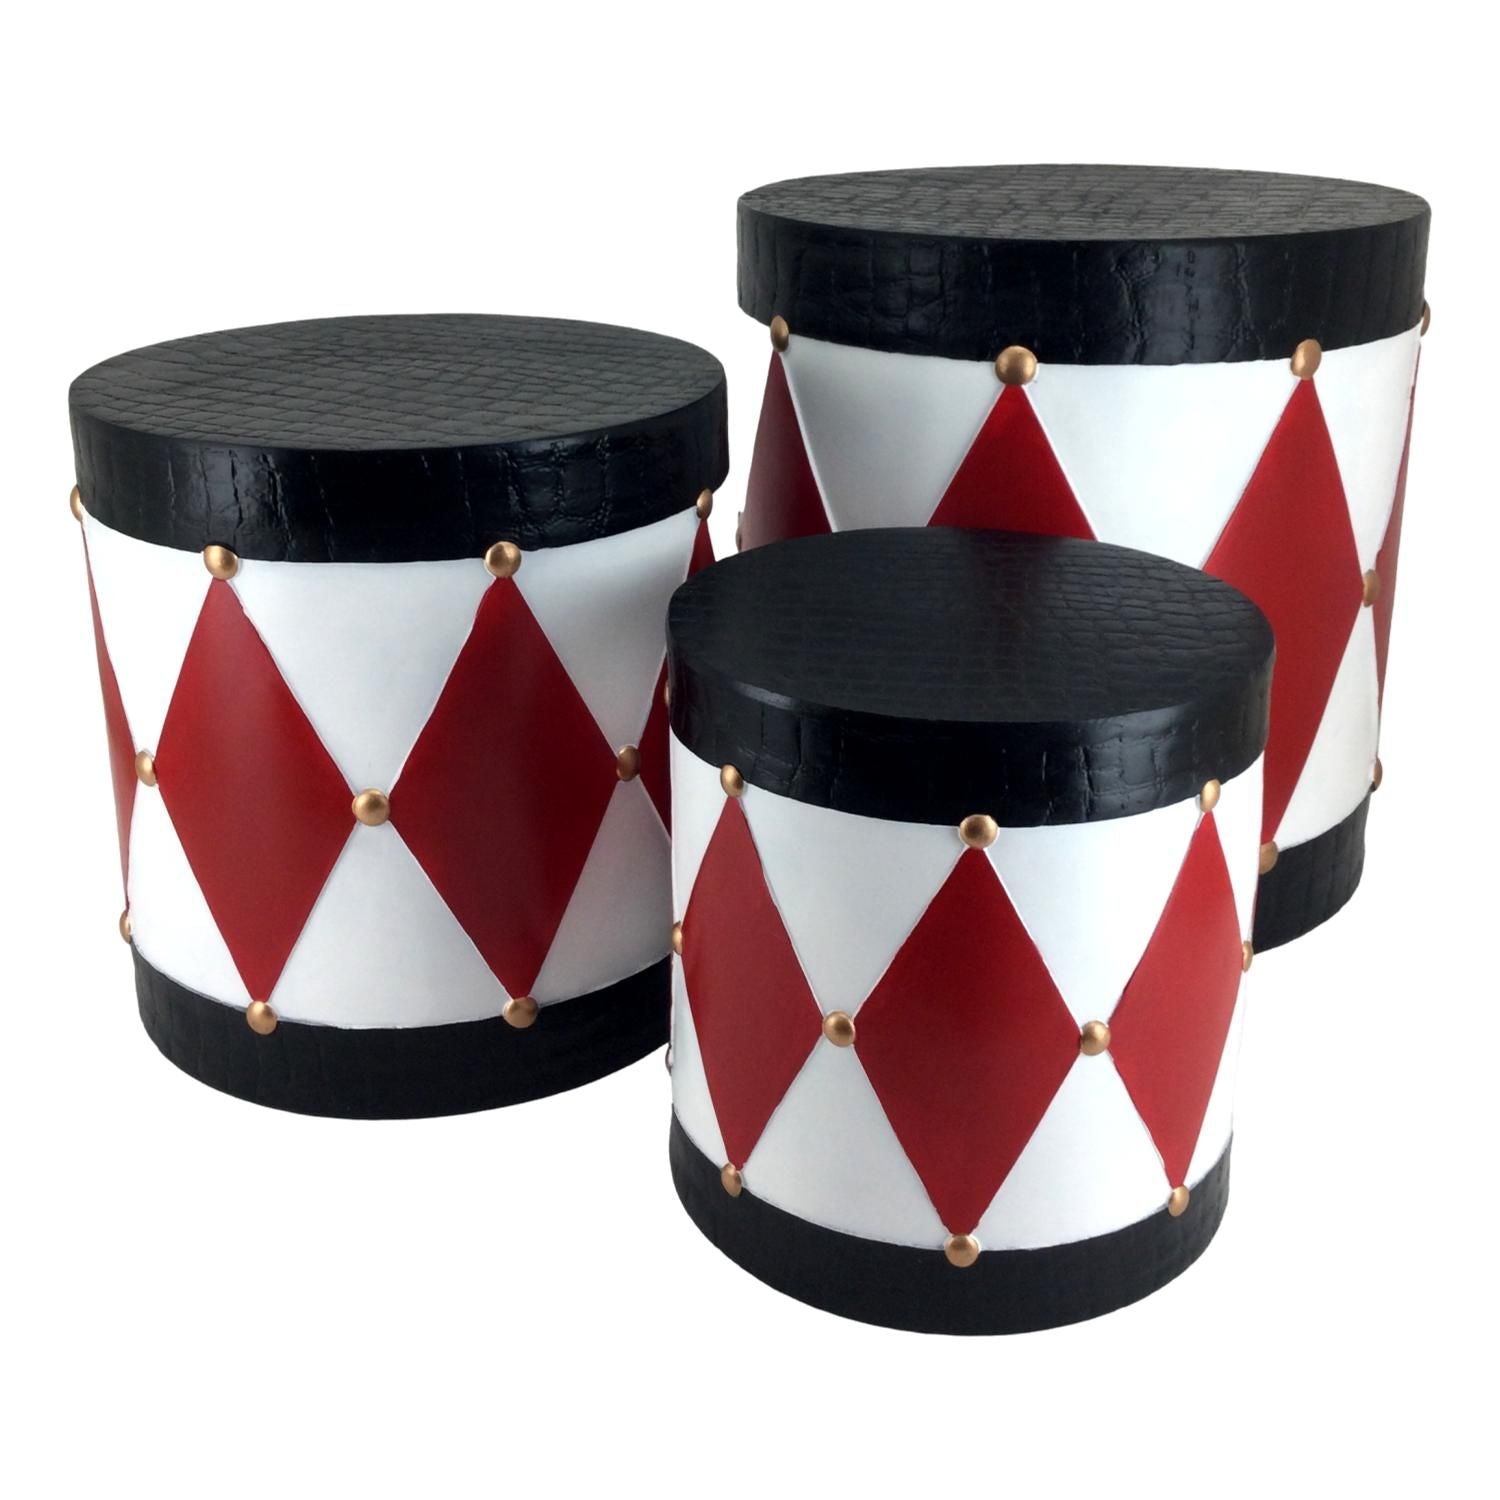 Set of 3 Drums - My Christmas